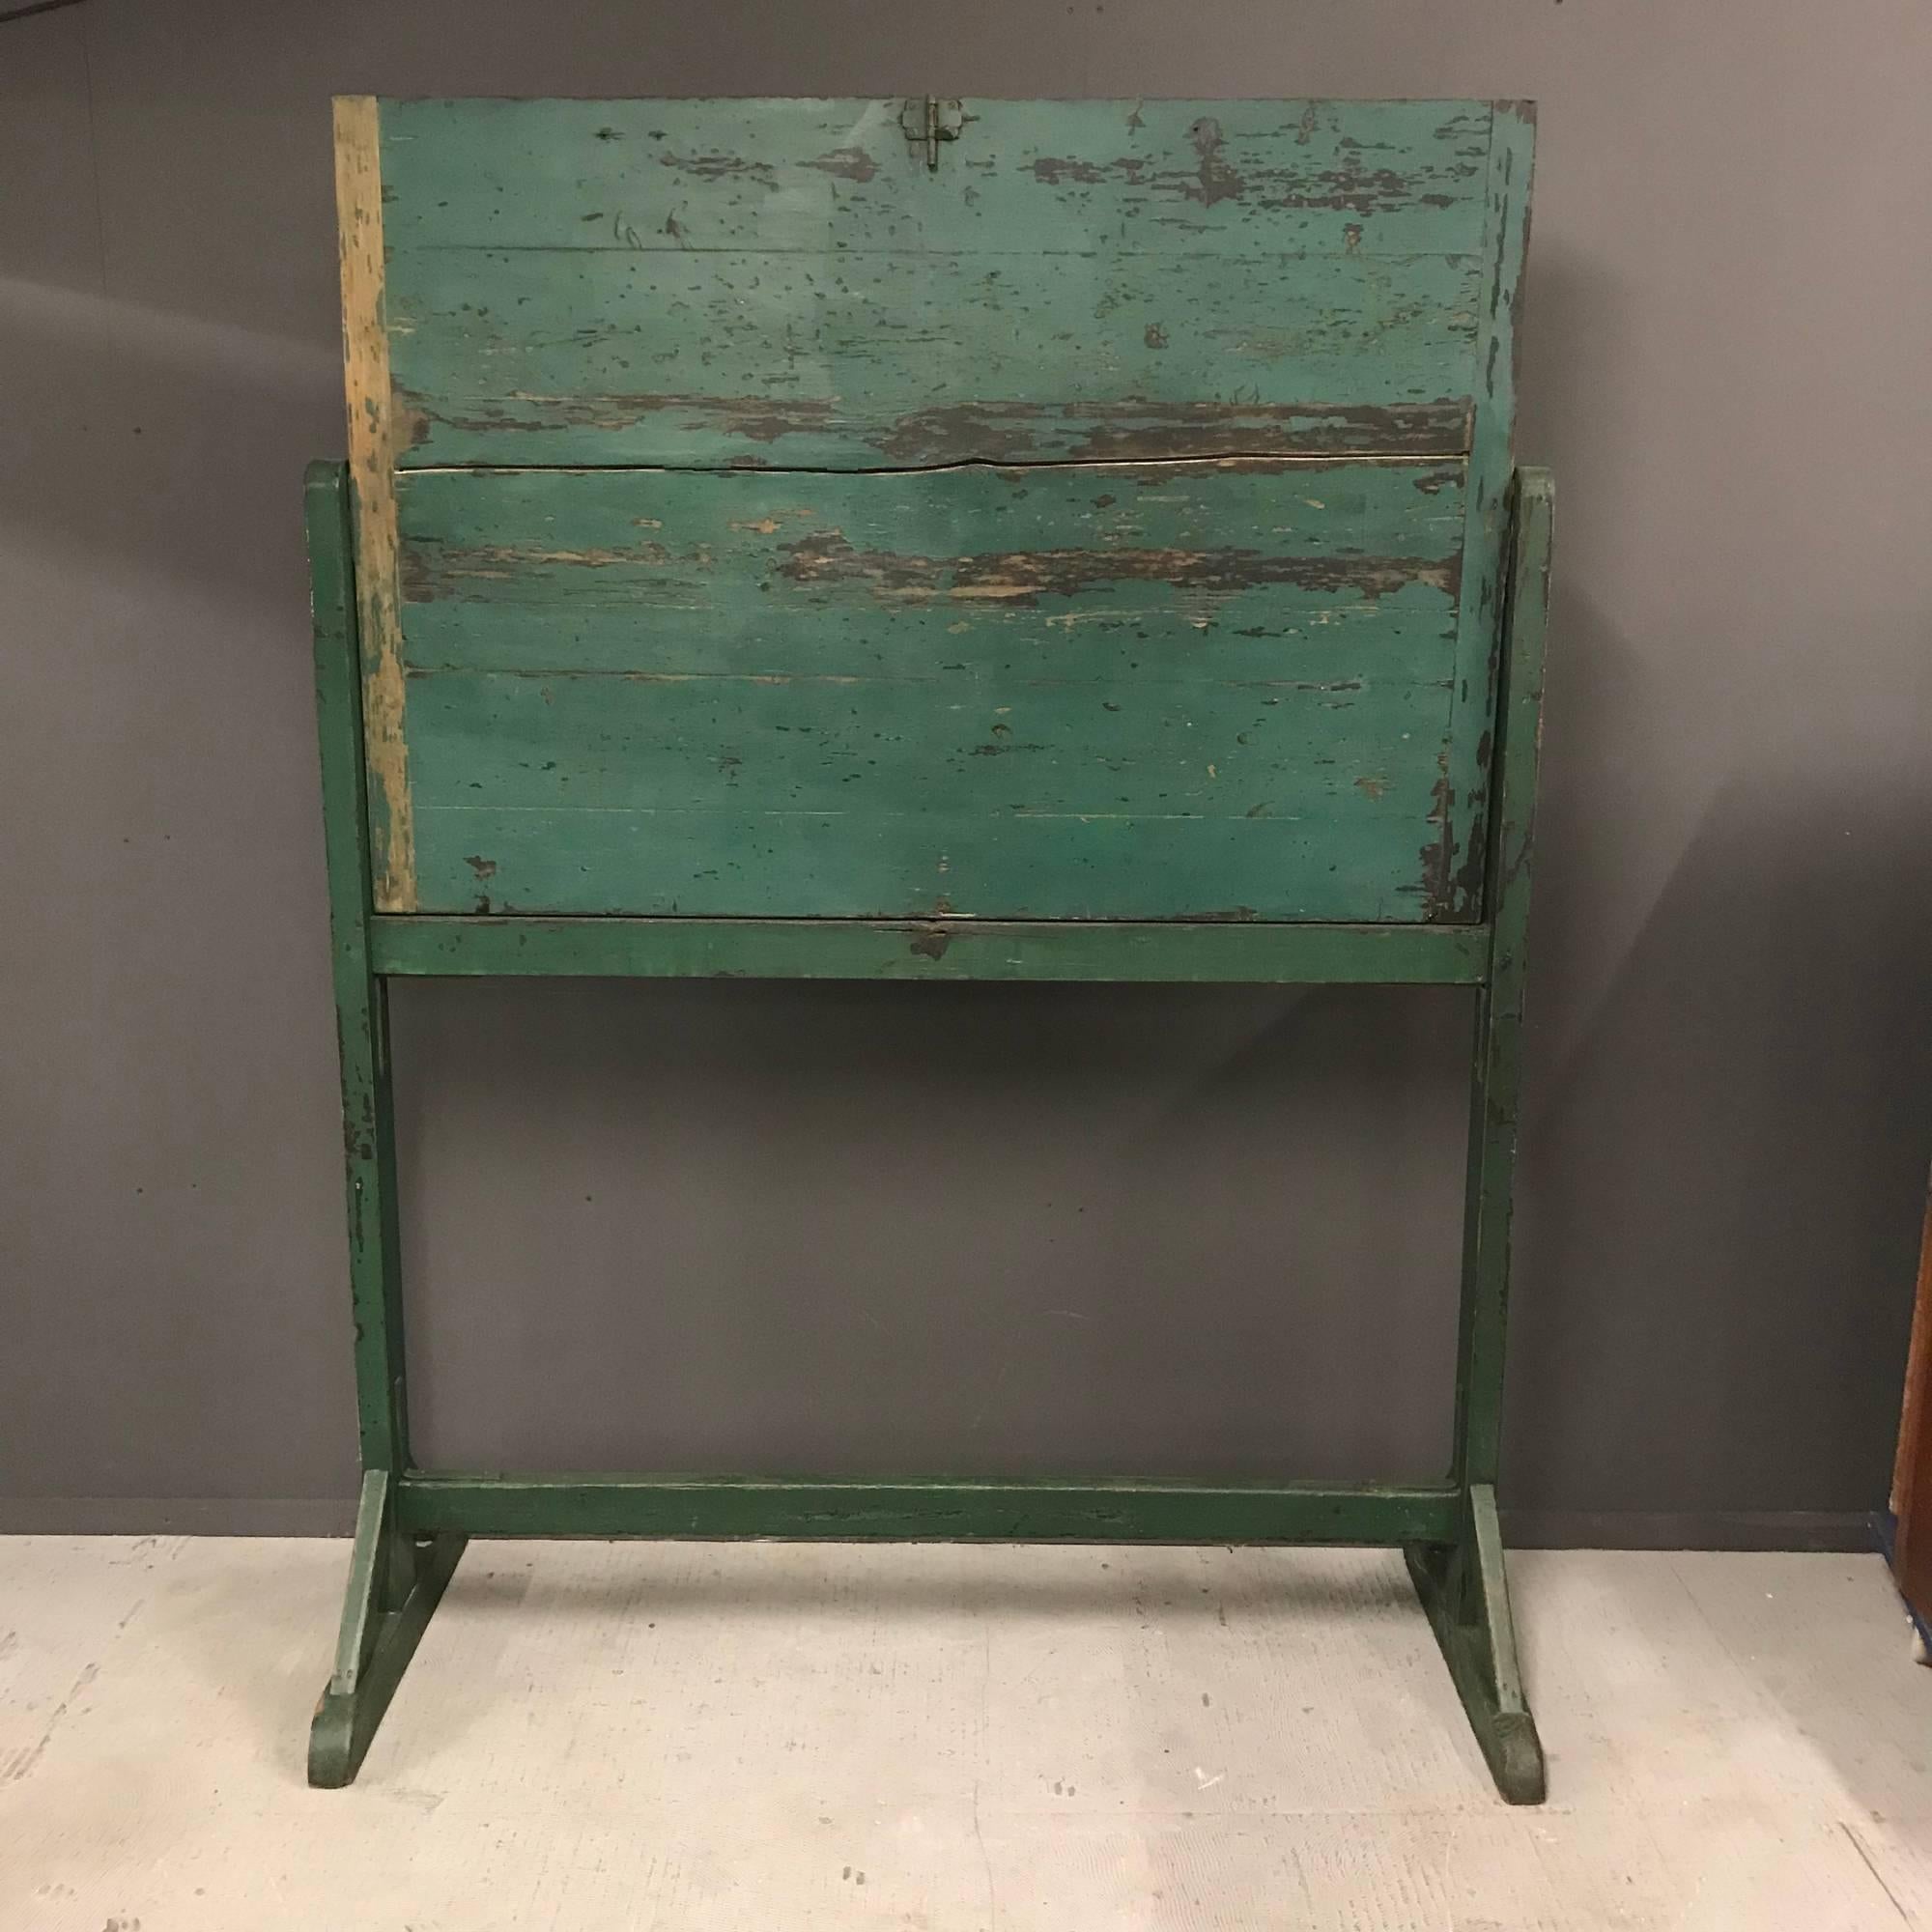 French antique green wooden black board. Nice patina, distressed paint and in good condition. The board is rotatable.